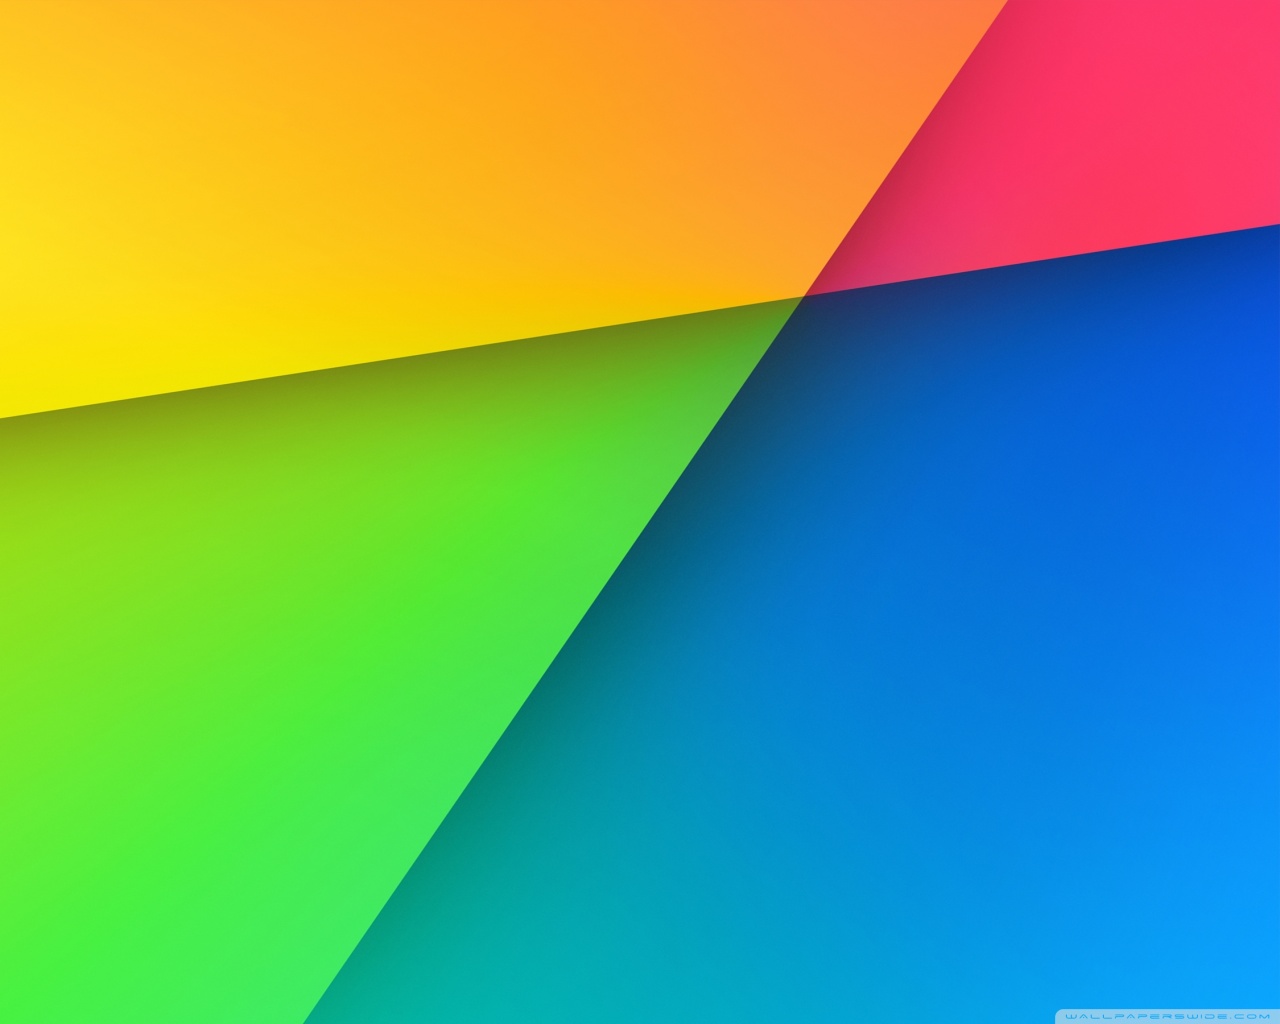 hd wallpapers for nexus 5,blue,green,orange,colorfulness,yellow